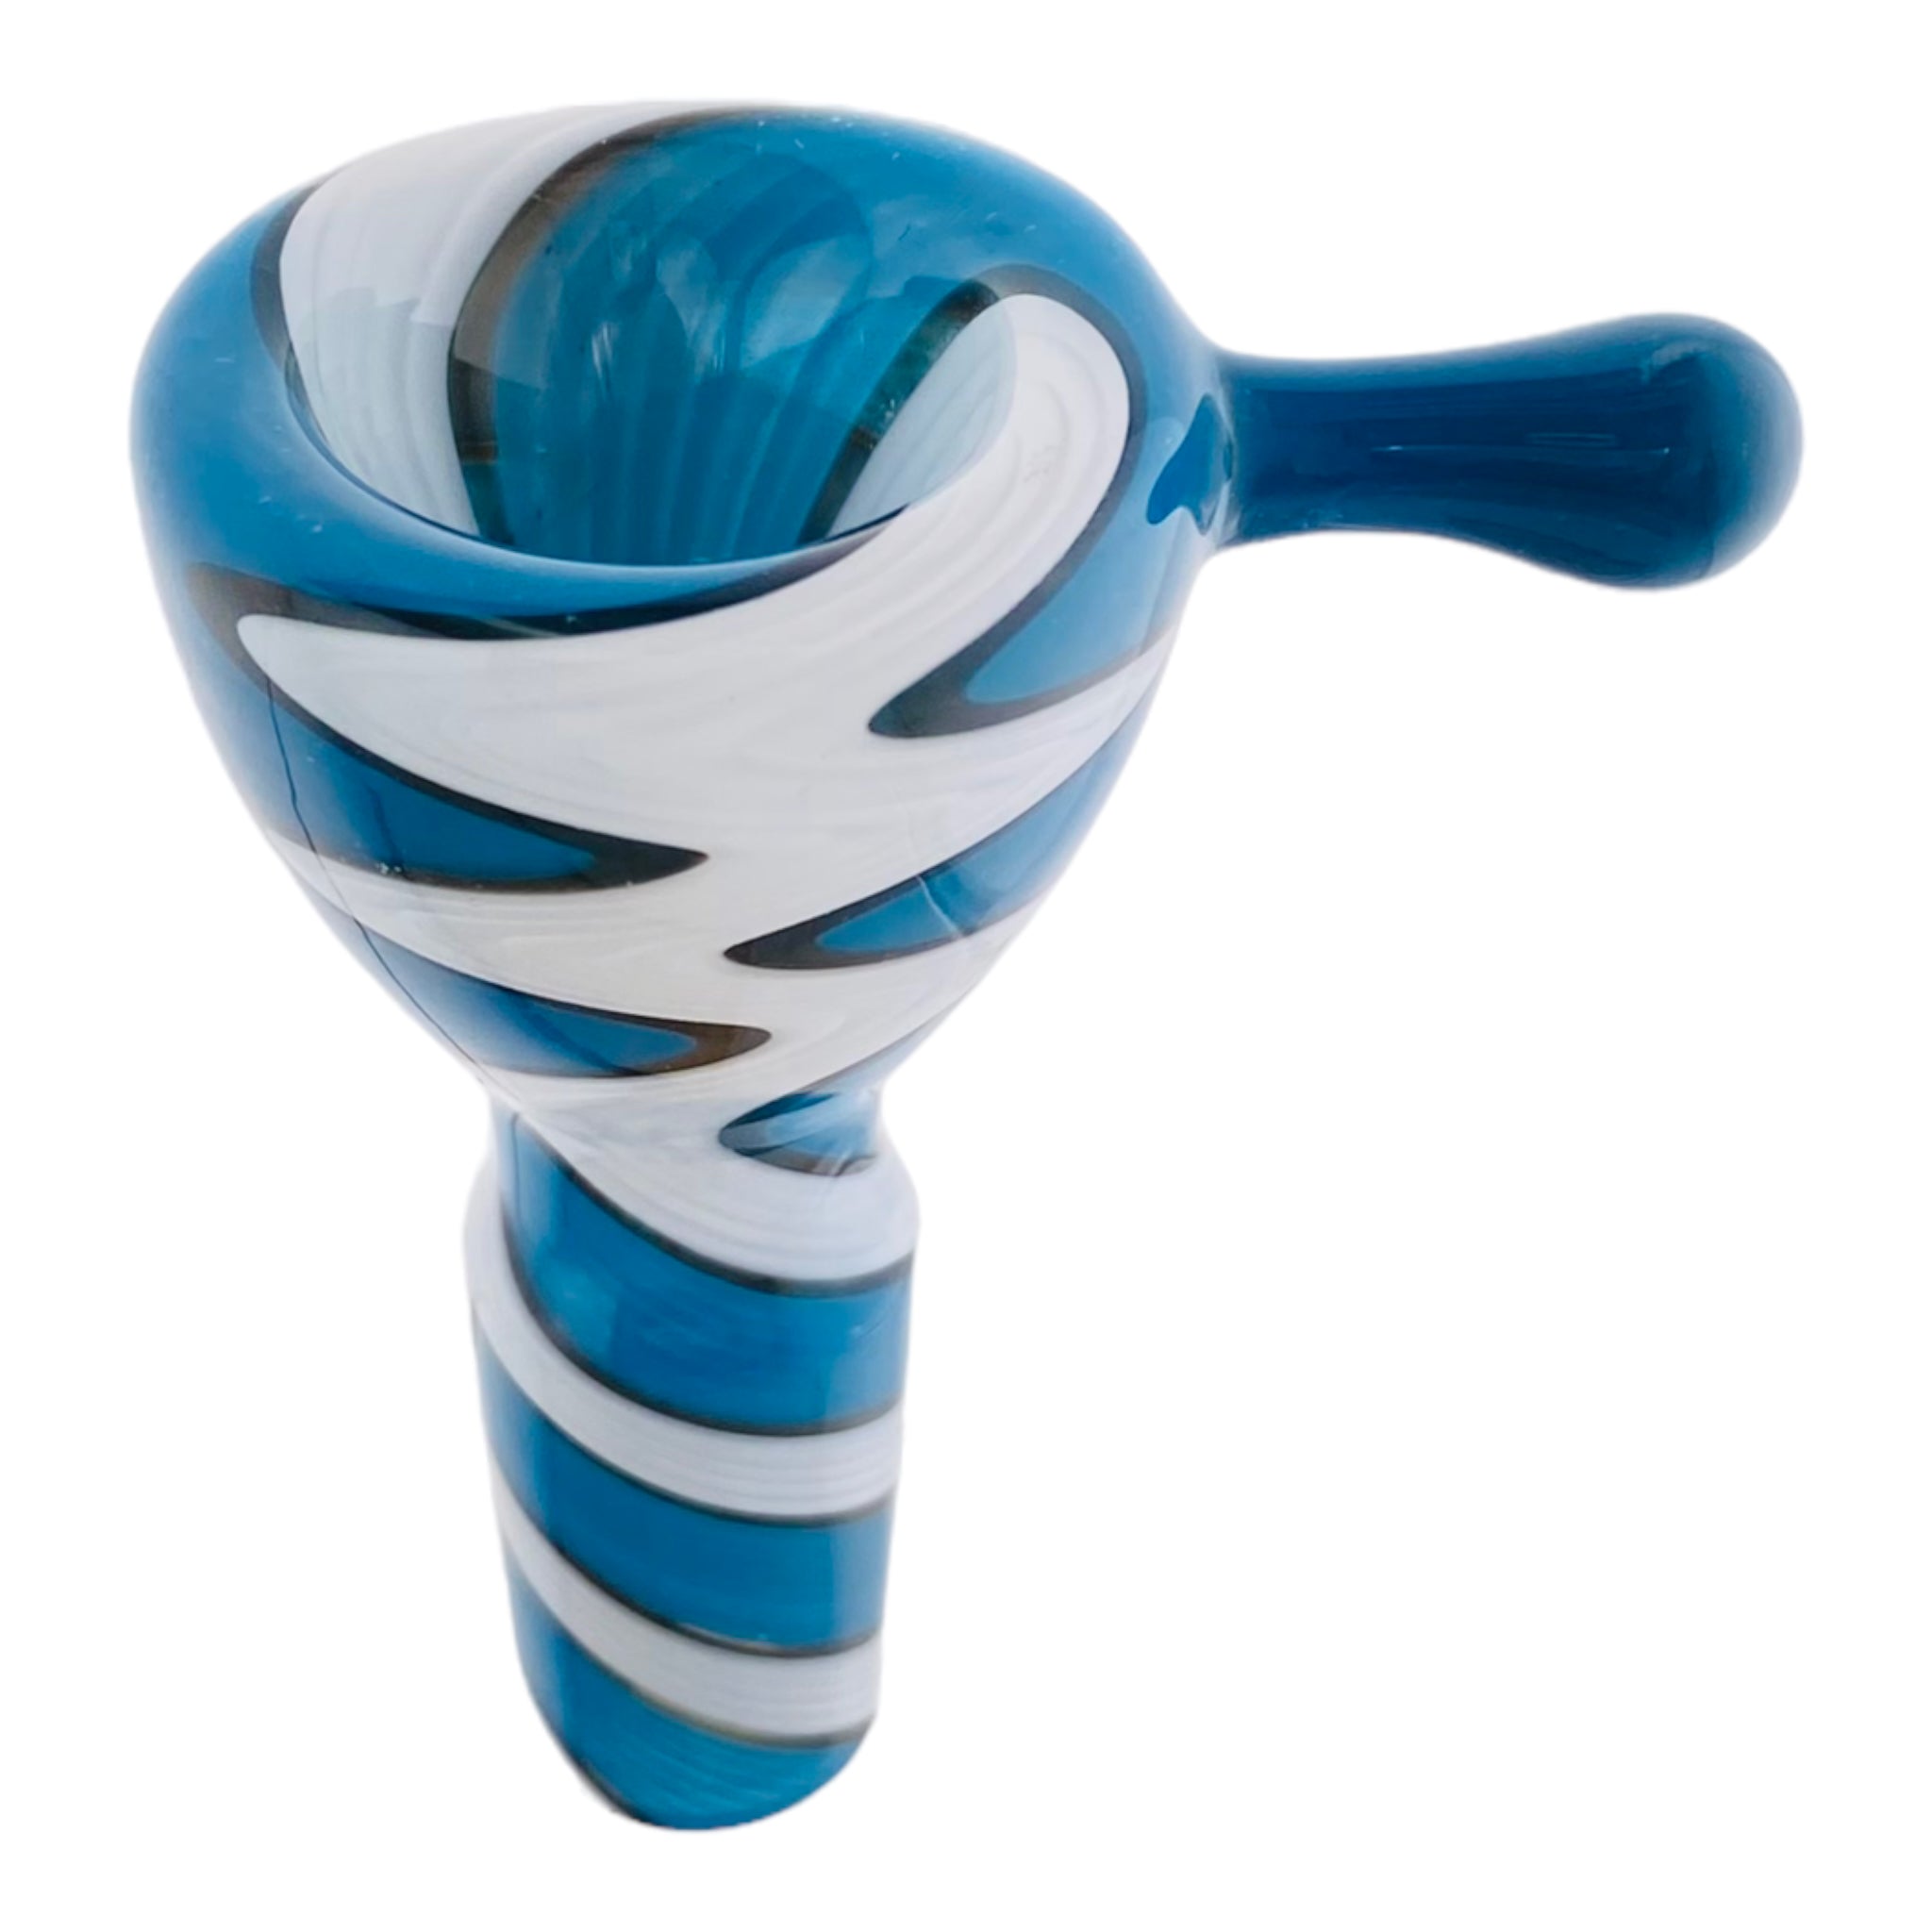 14mm Flower Bowl - Full Color Blue & White Wig Wag Bong Bowl Piece